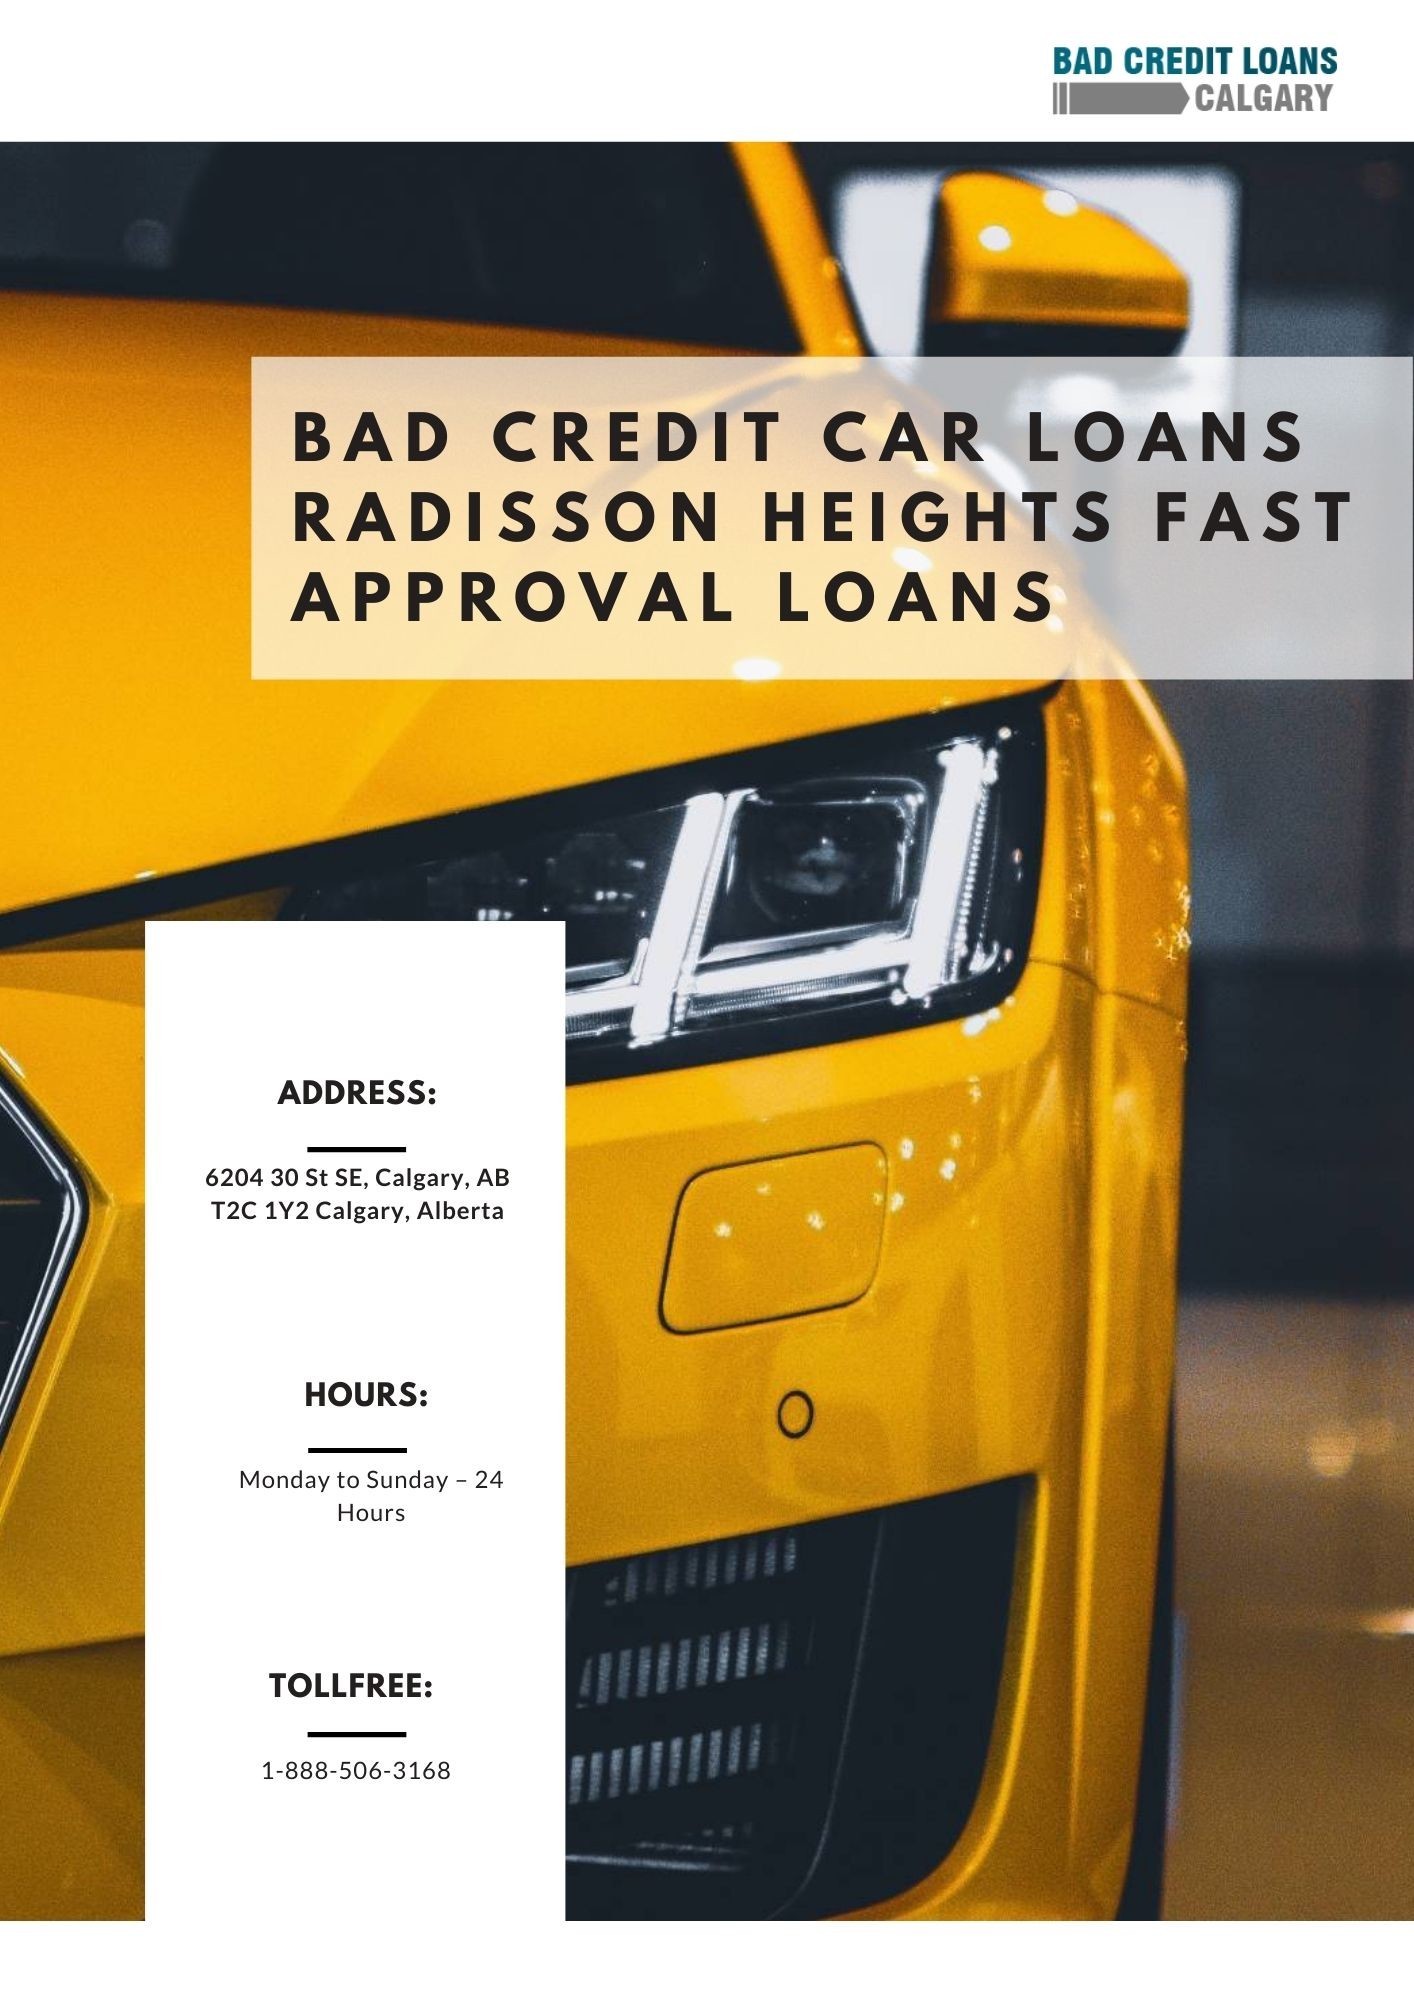  Bad Credit Car Loans Radisson Heights fast approval loans